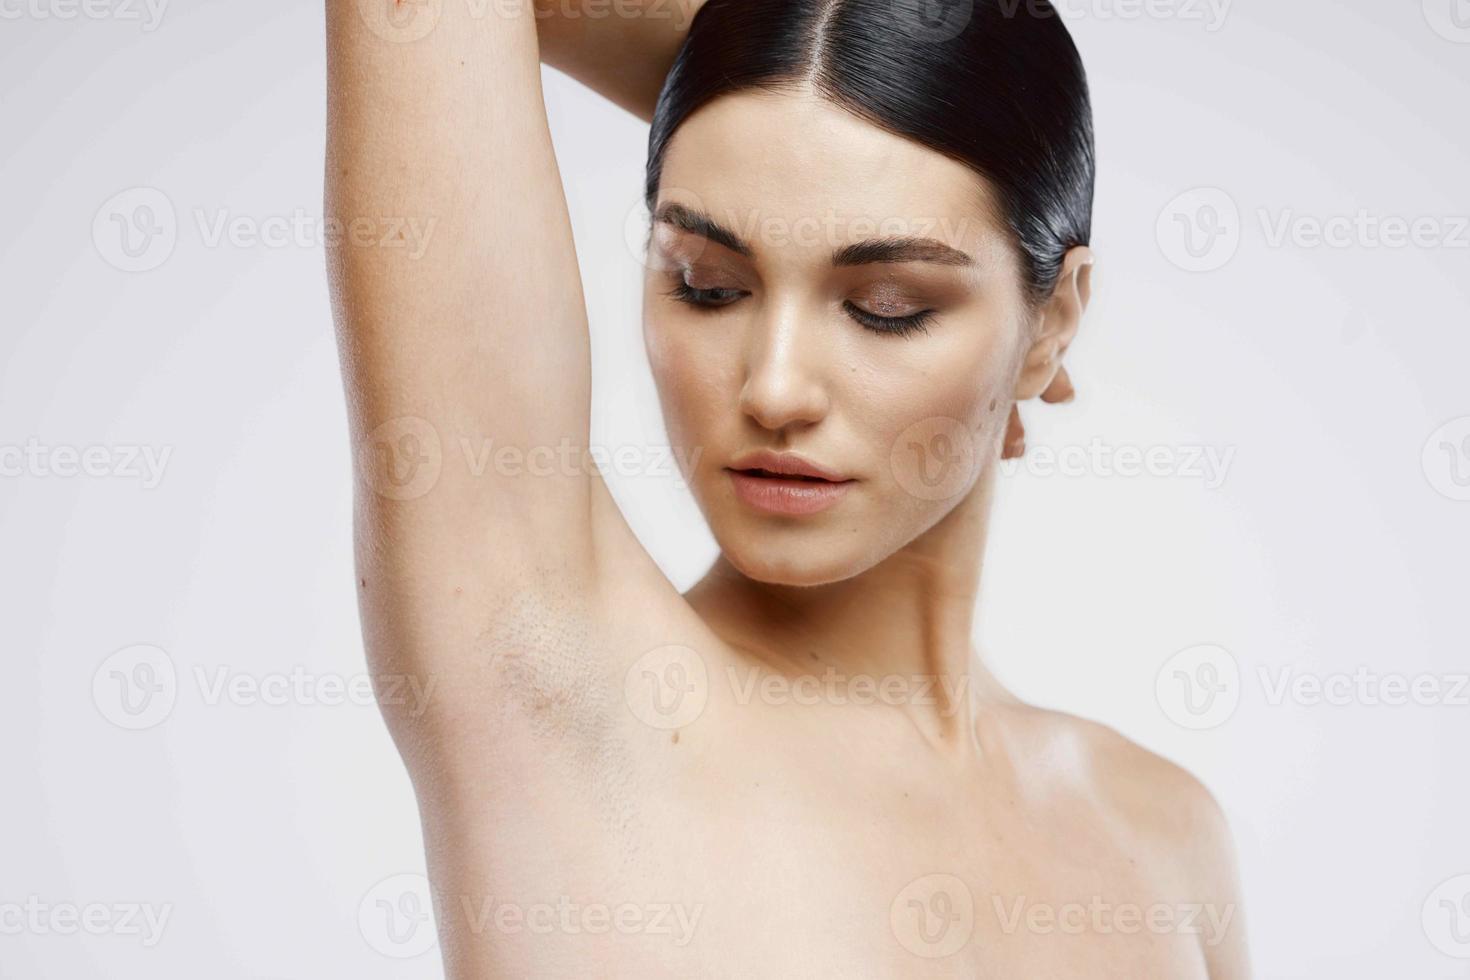 pretty brunette naked shoulders clear skin cosmetology photo